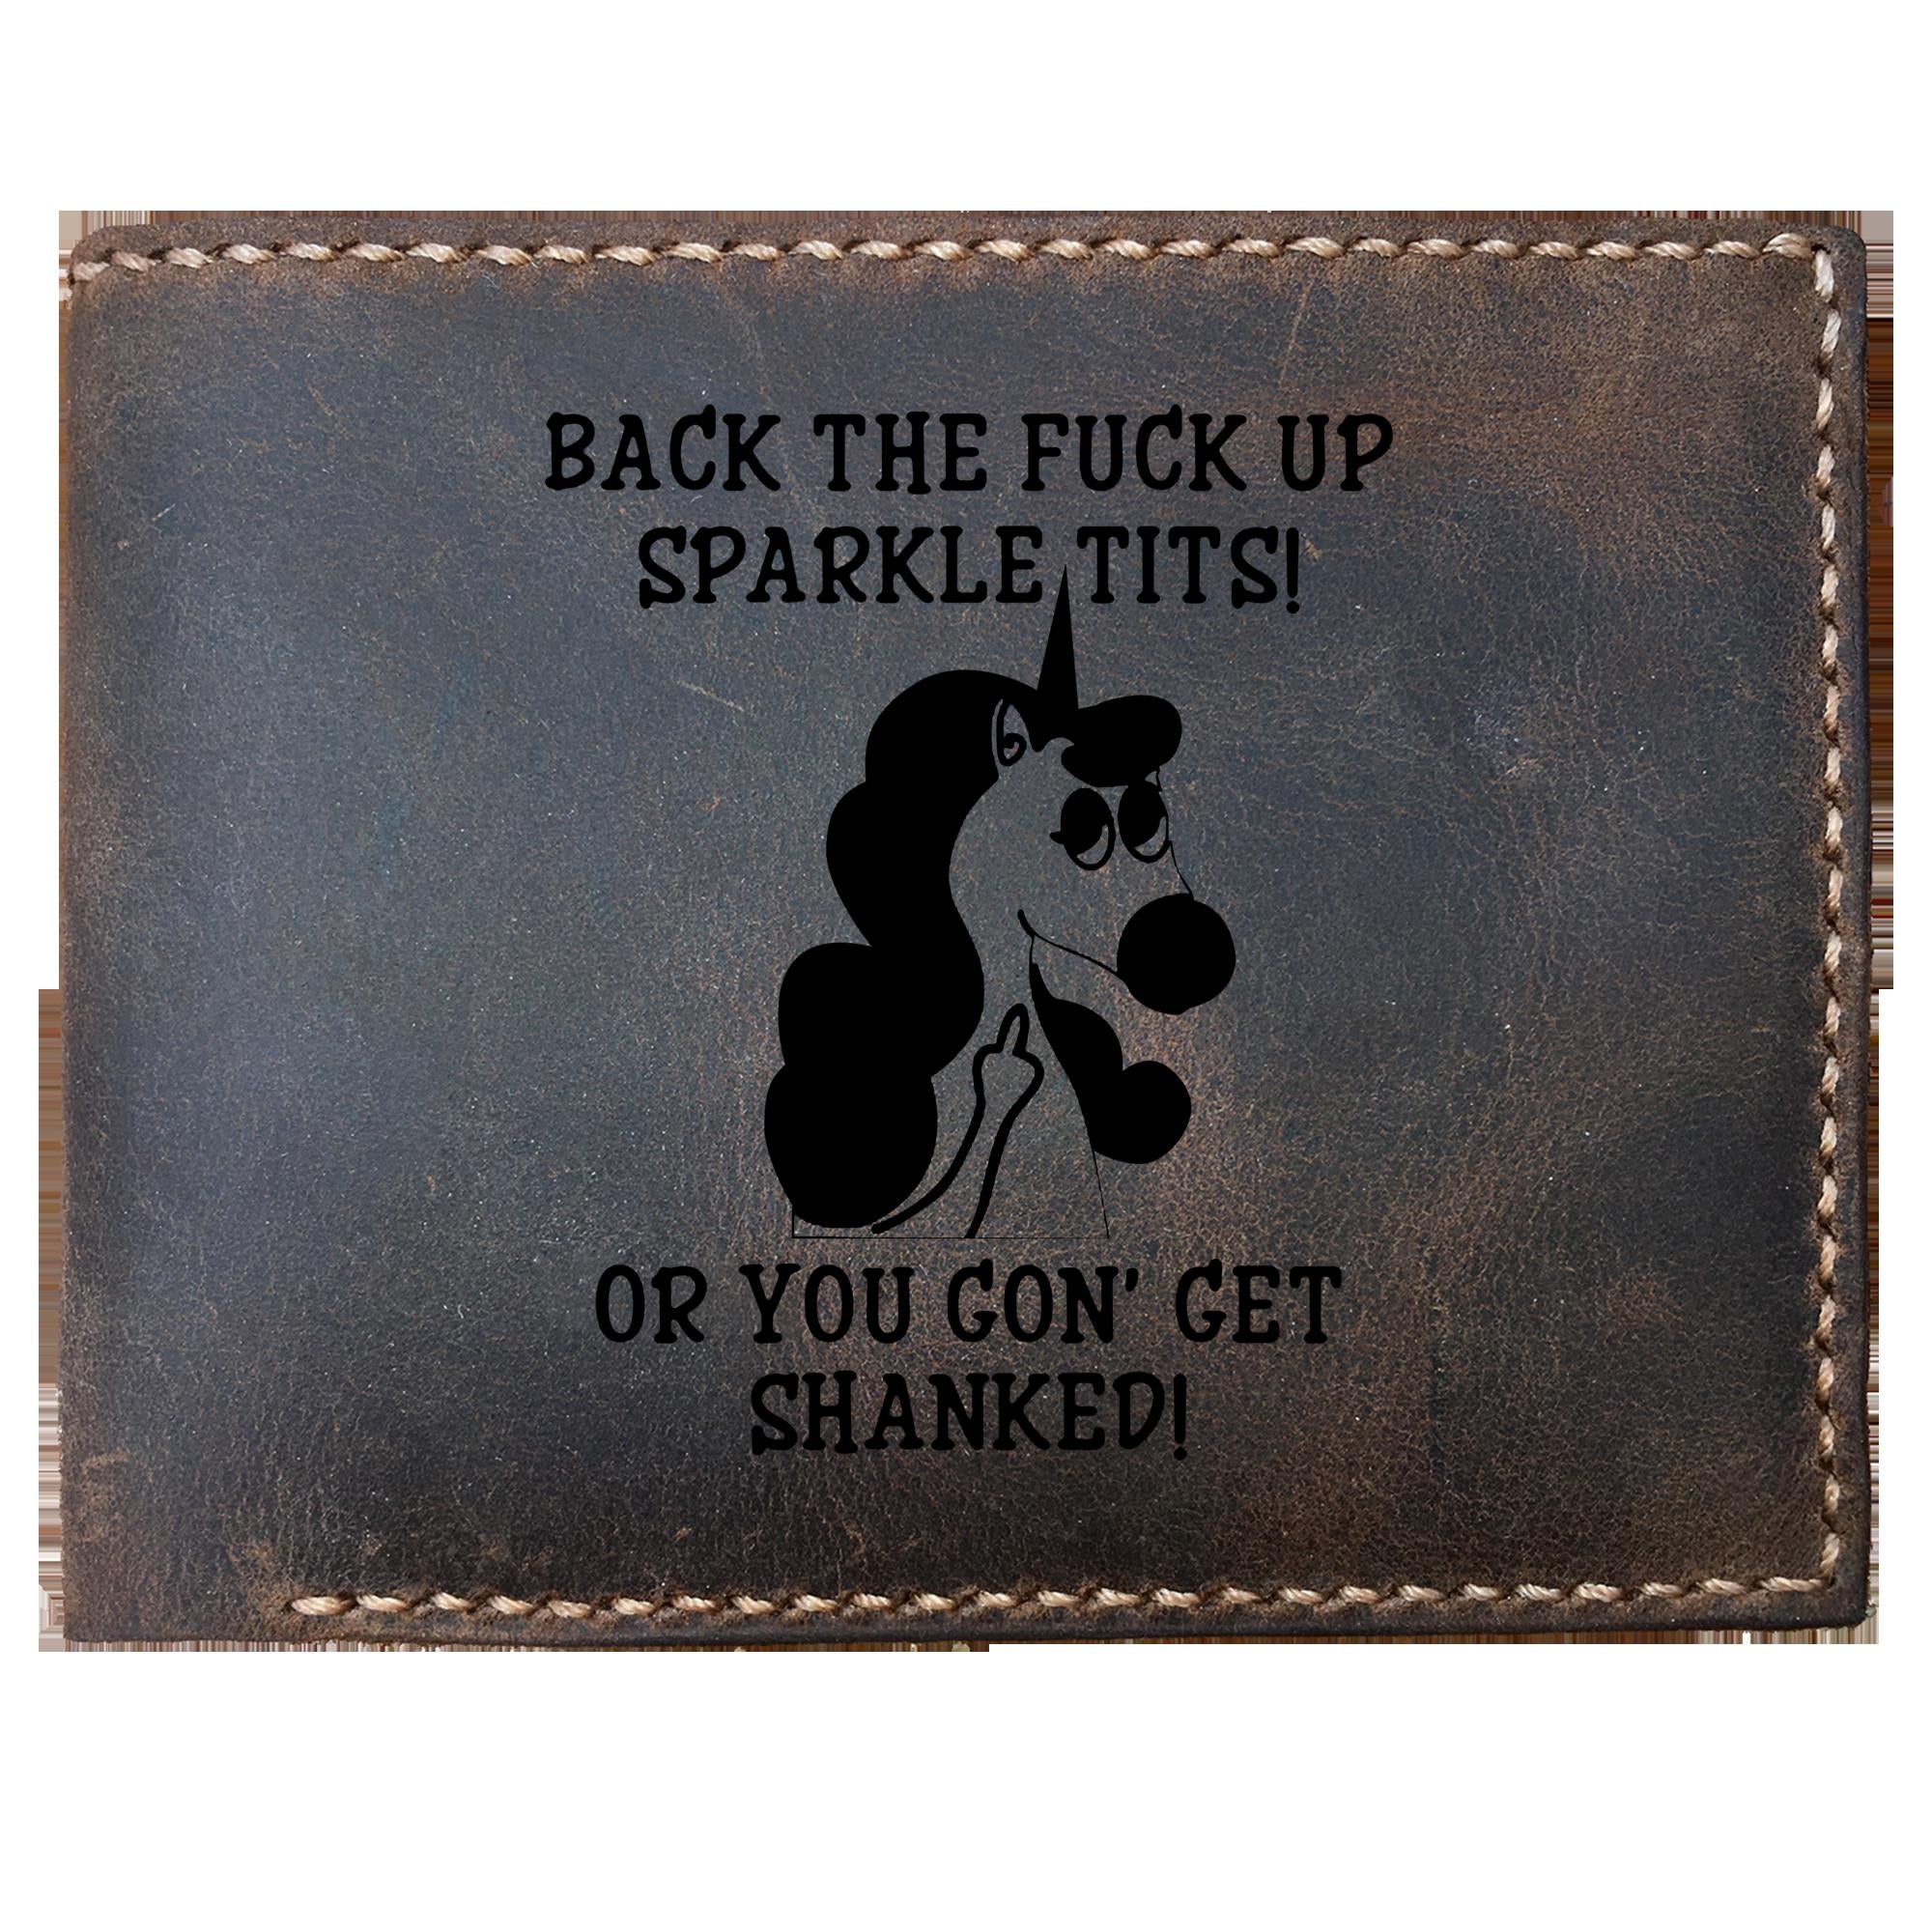 Skitongifts Funny Custom Laser Engraved Bifold Leather Wallet For Men, Unicorn Back The Fcuk Up Sparkle Tits Or You Gon Get Shanked